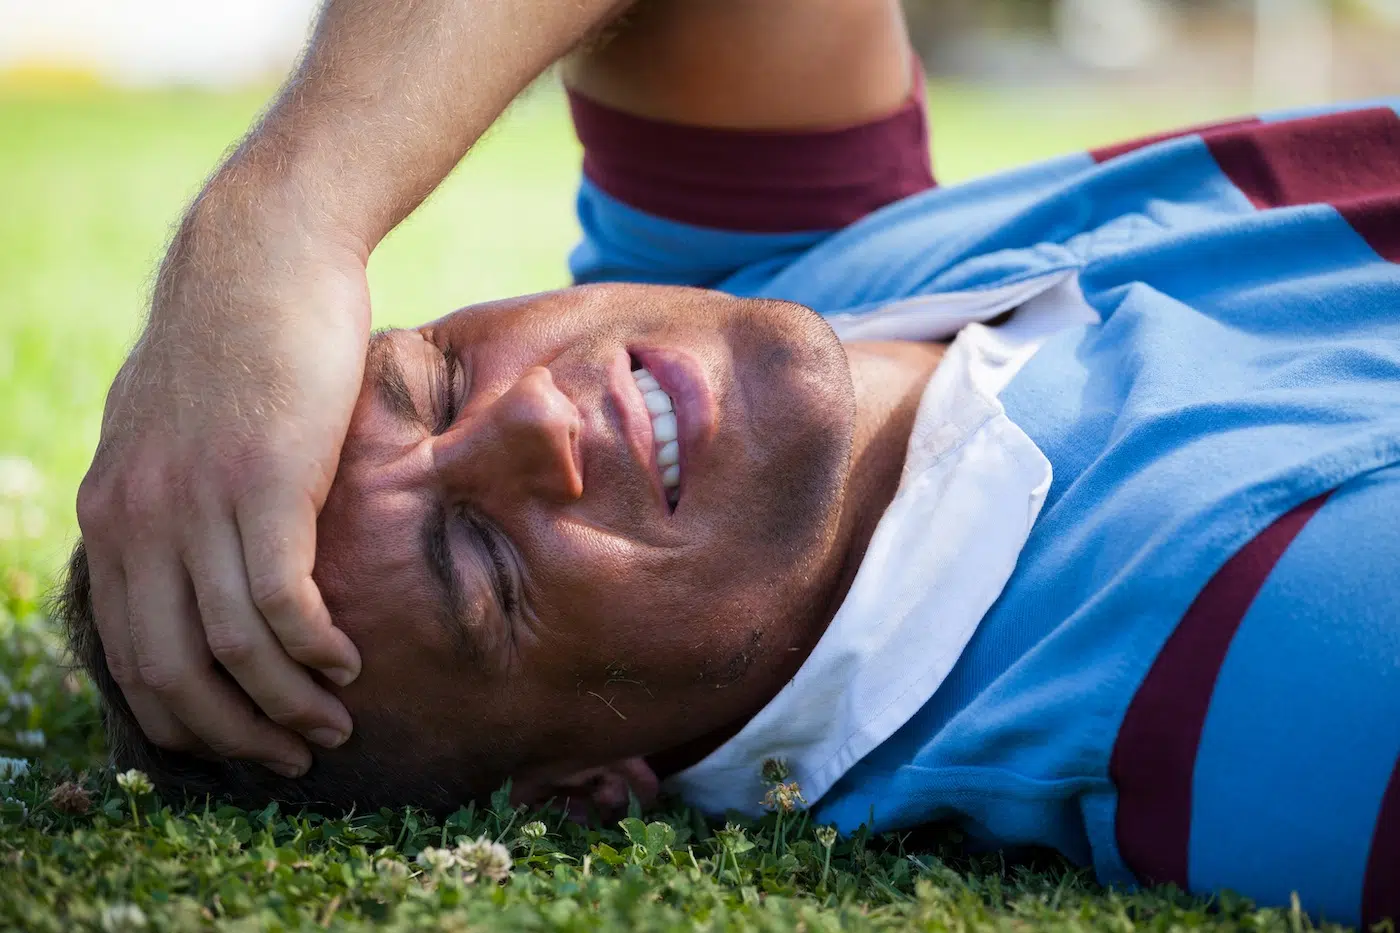 Injured rugby player with eyes closed lying on field